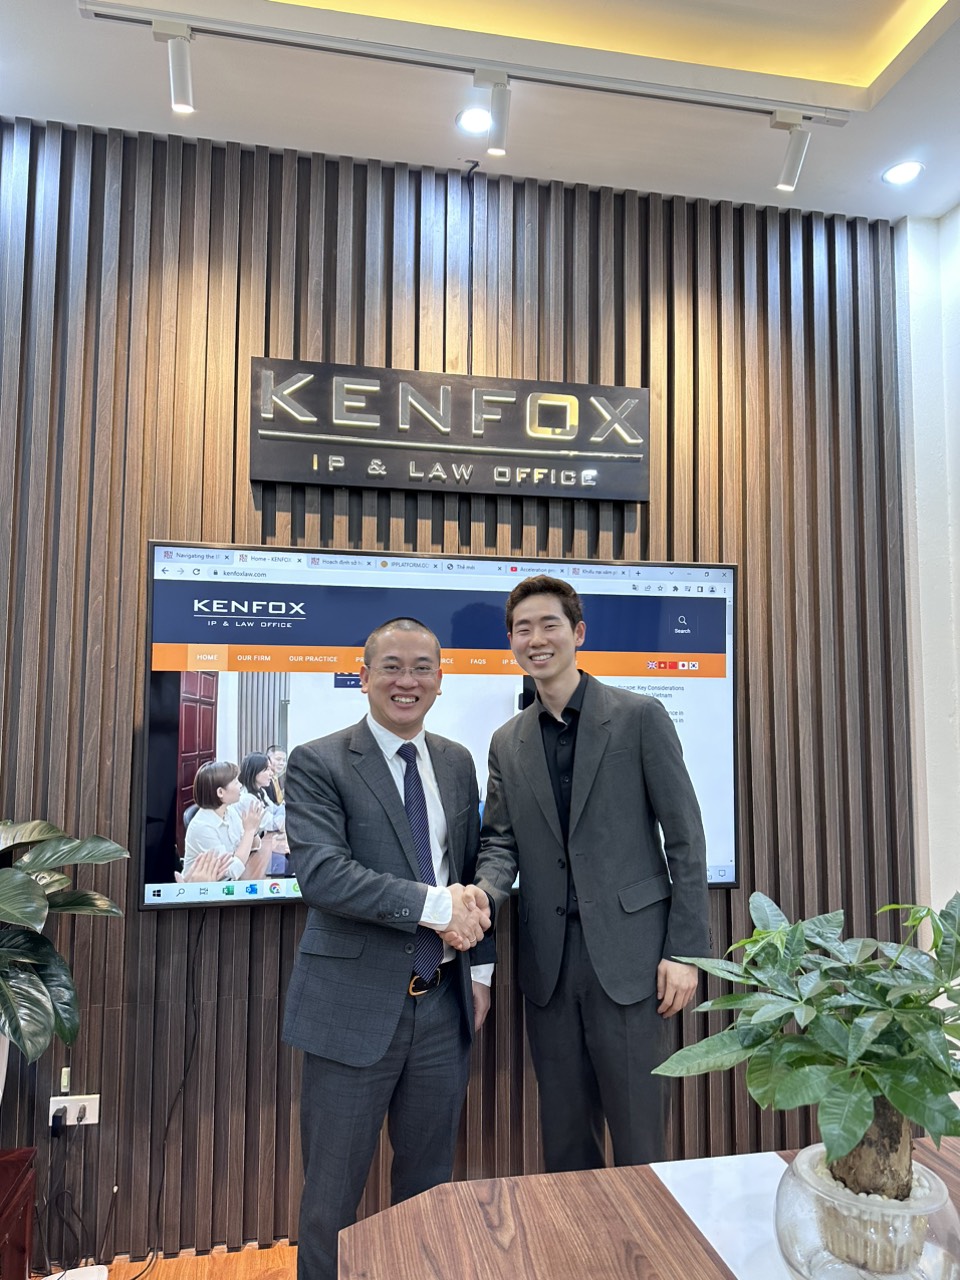 The Korean cosmetic company demonstrated an understanding of the significance of safeguarding their intellectual property rights in Vietnam, as well as the promising opportunities for expansion in the local cosmetic market.